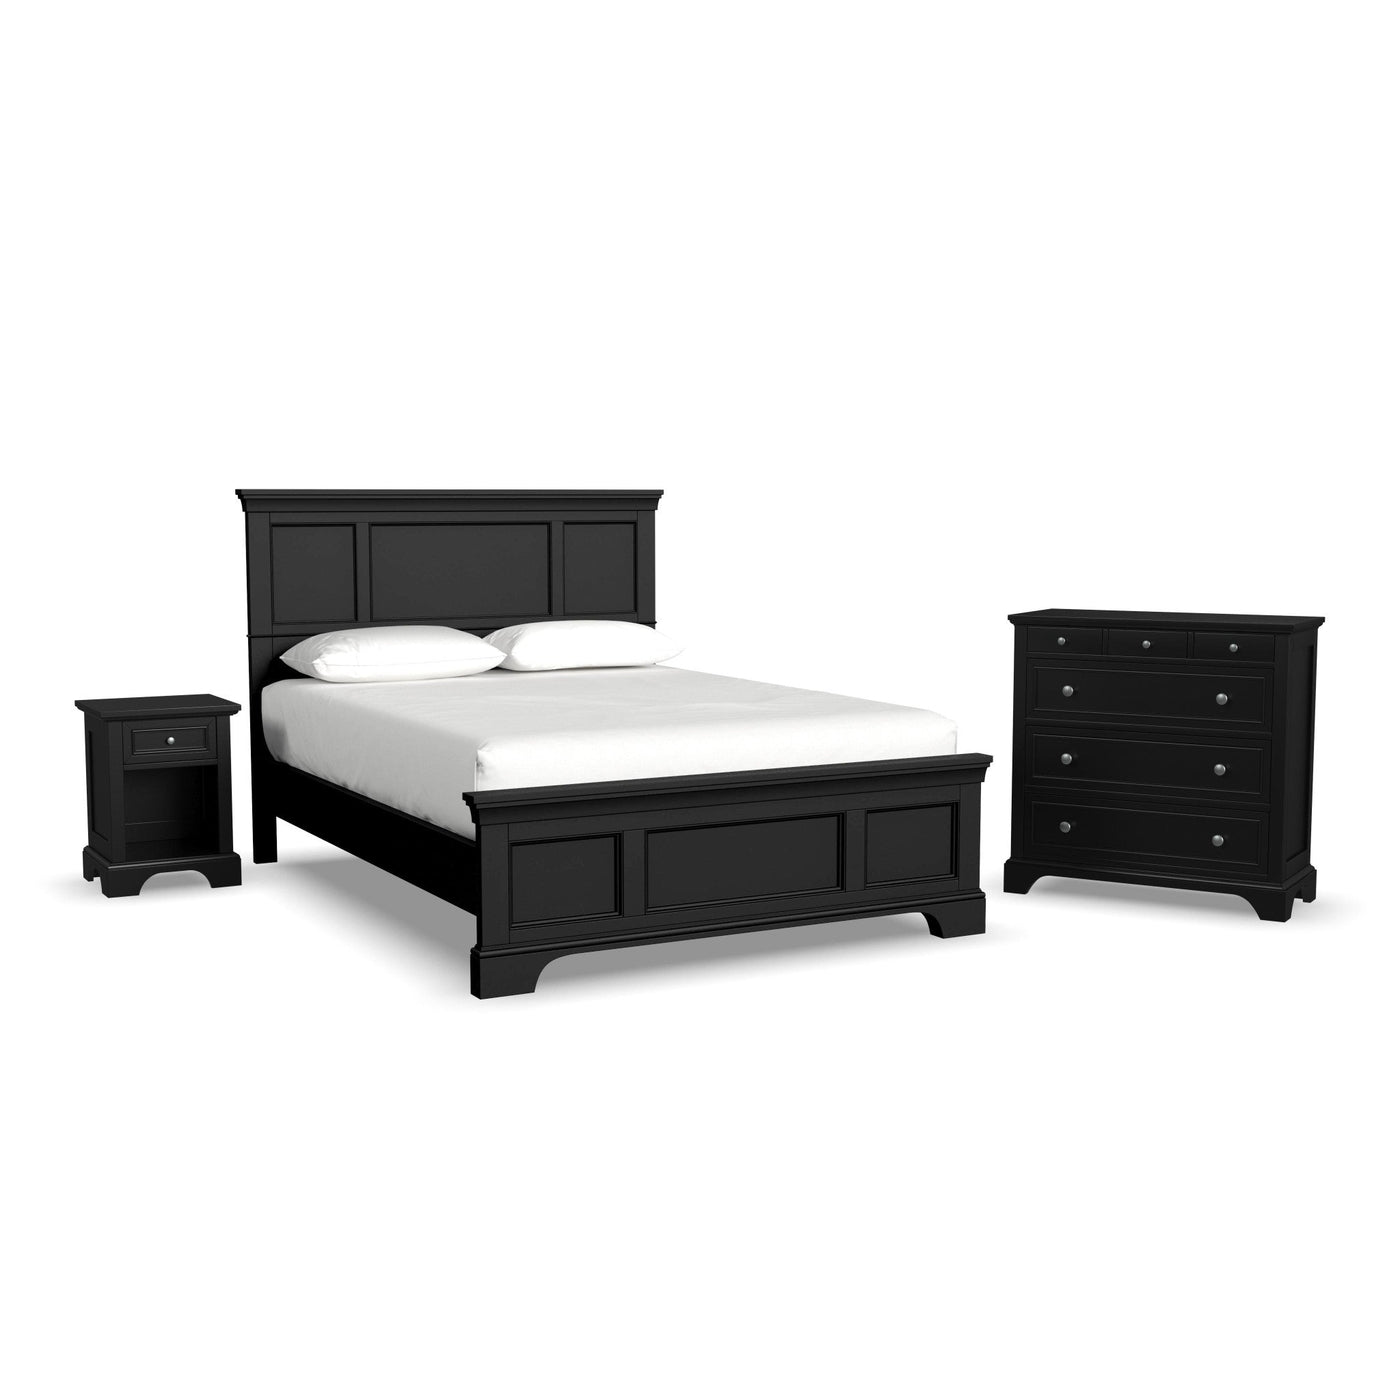 Ashford Queen Bed, Nightstand and Chest - Black by Homestyle